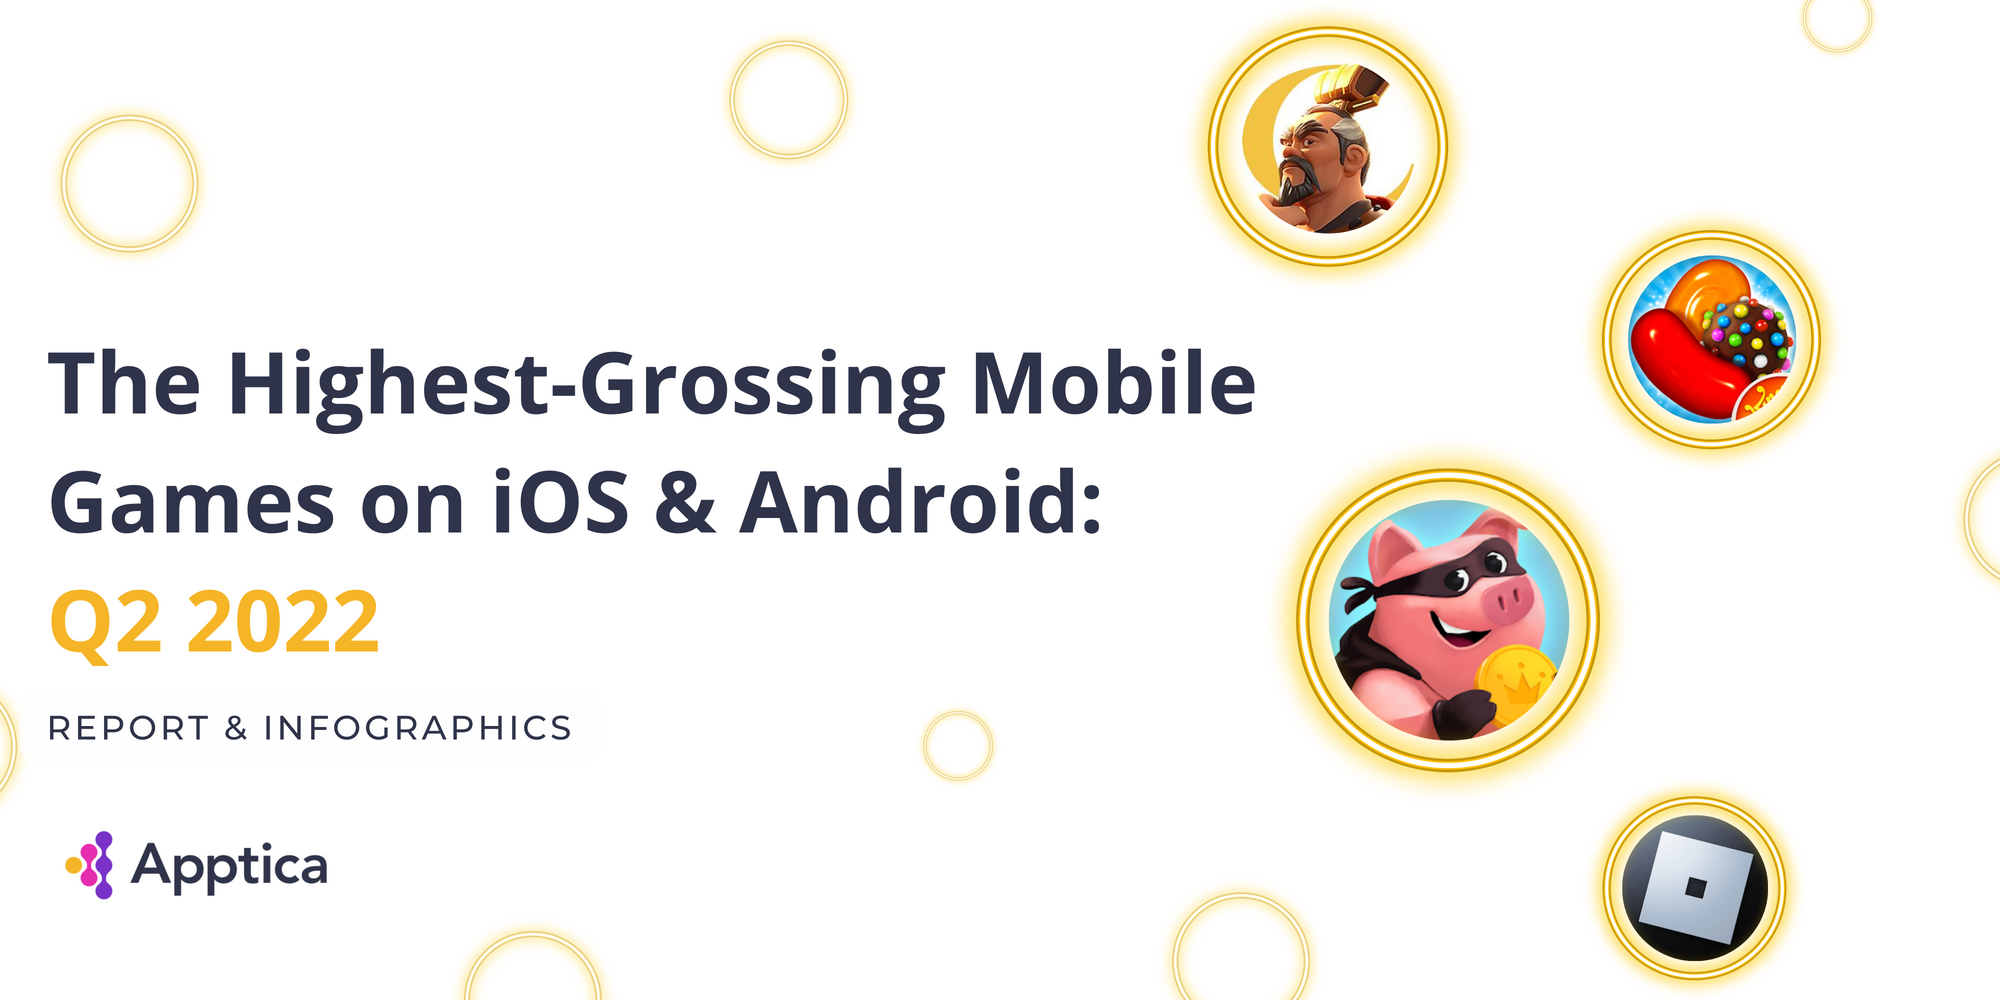 The Highest-Grossing Mobile Games on iOS & Android:
Q2 2022